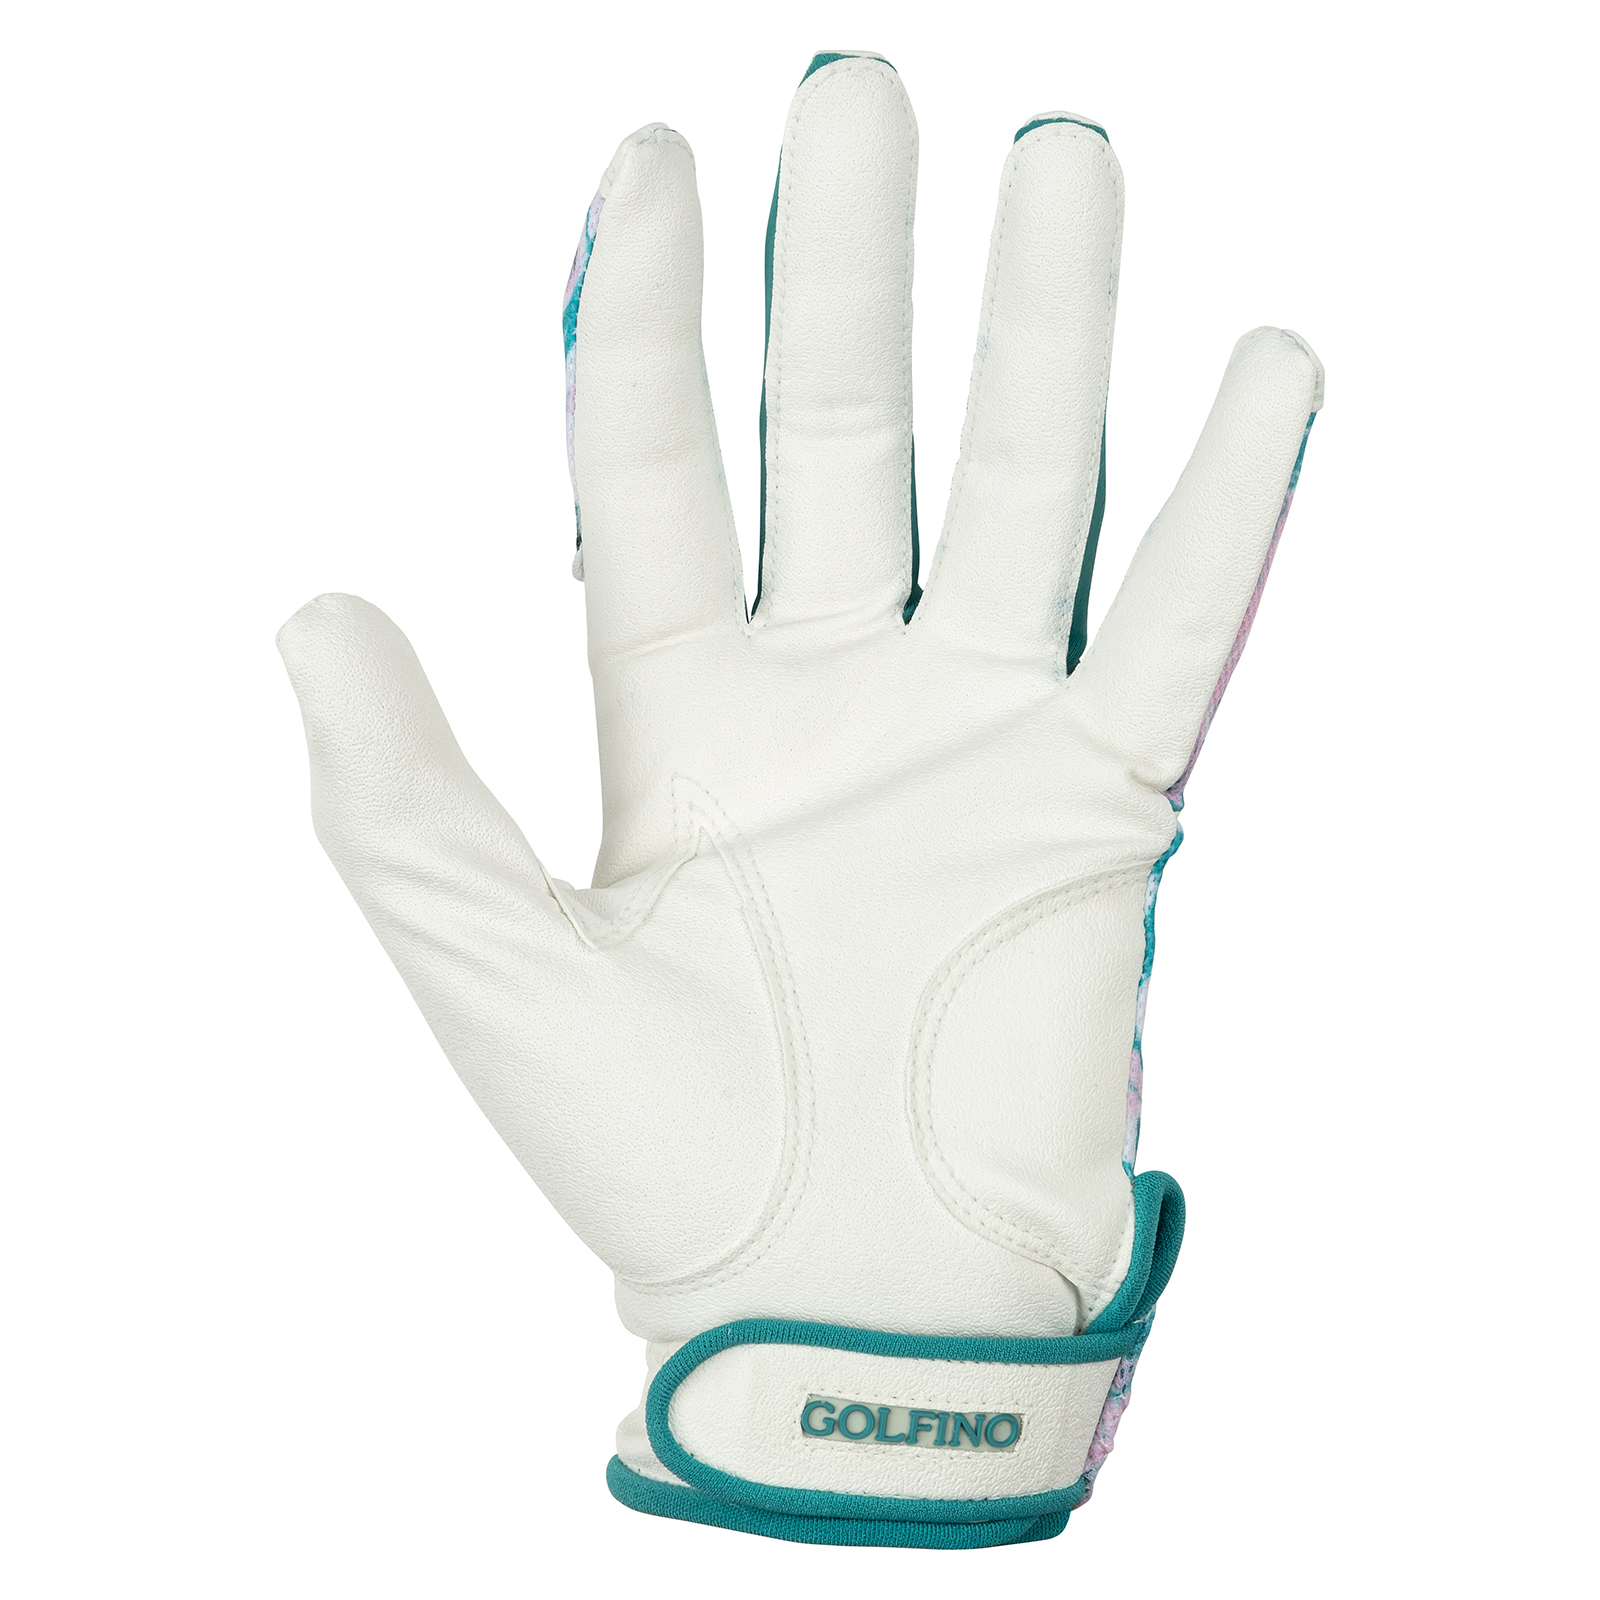 Durable and comfortable ladies' gloves